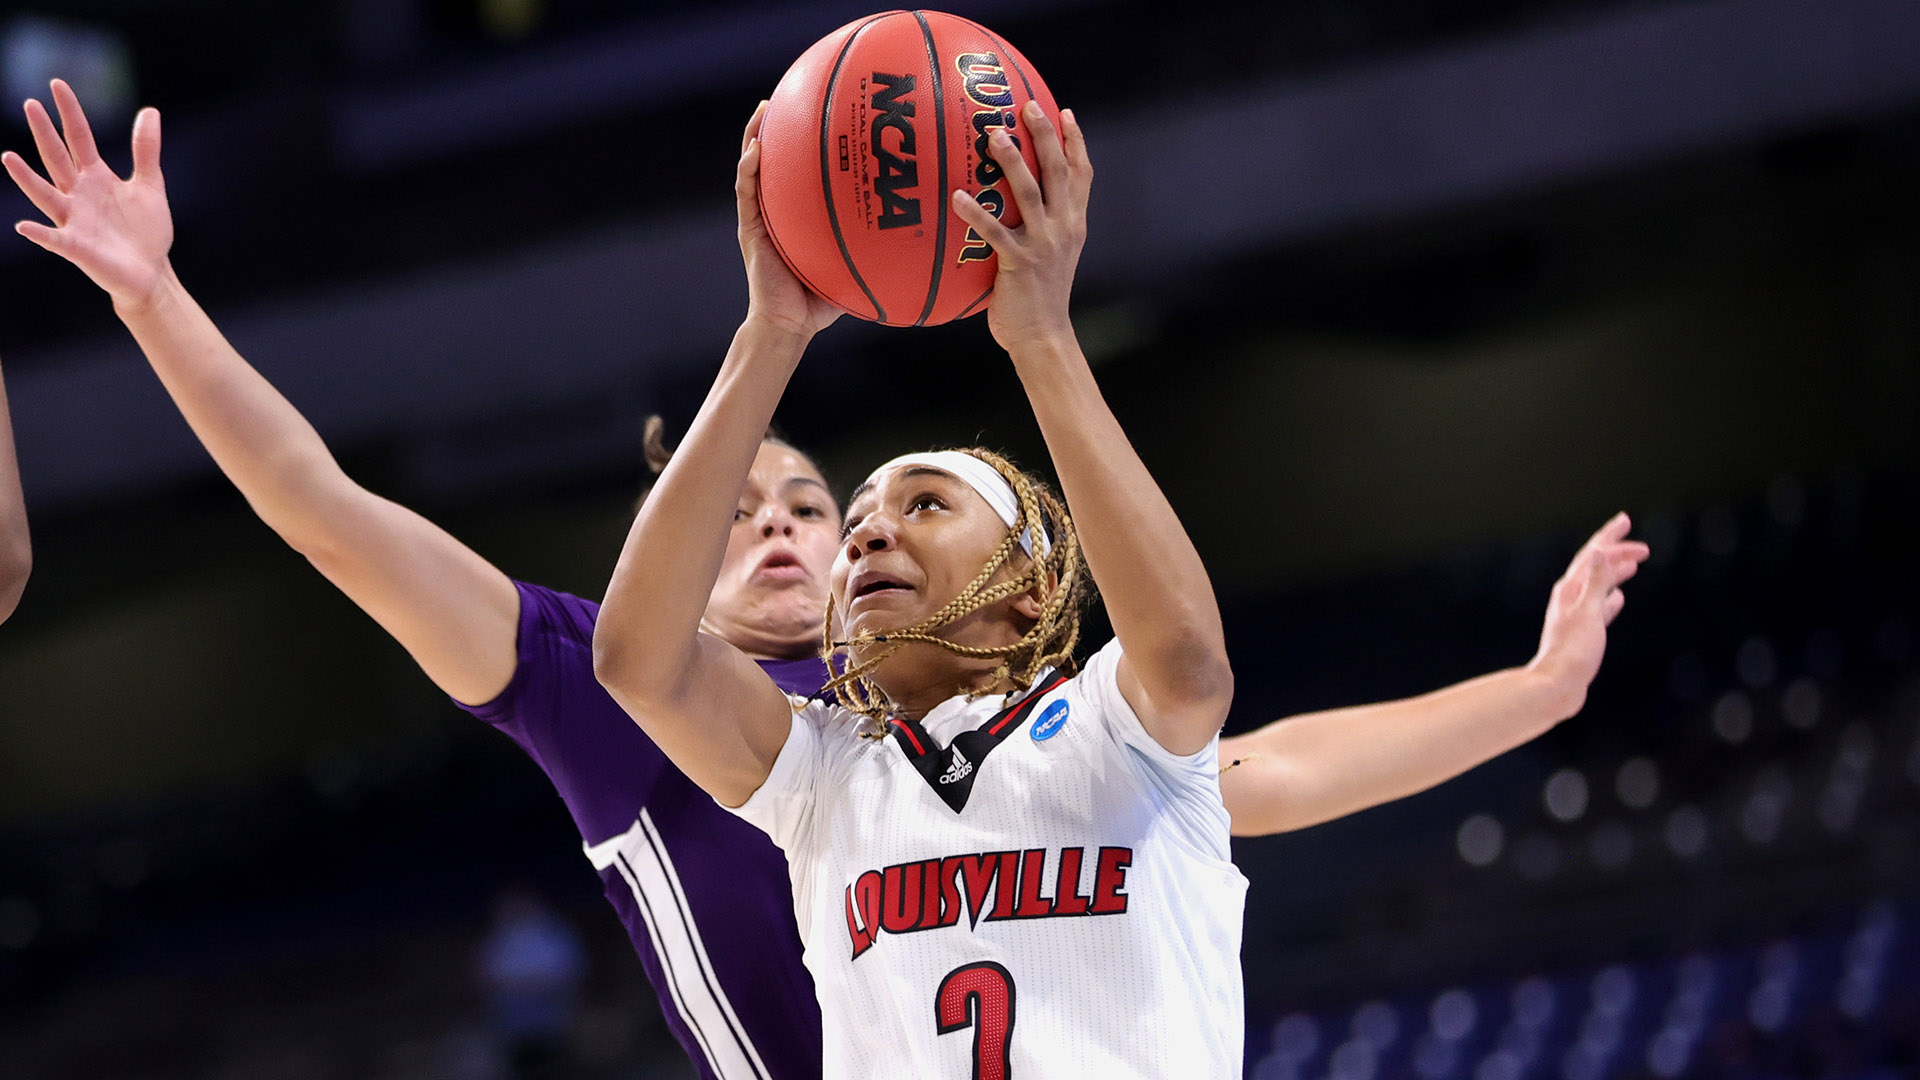 Louisville rallies from 18 down to beat Northwestern 62-53 - College Basketball | NBC Sports